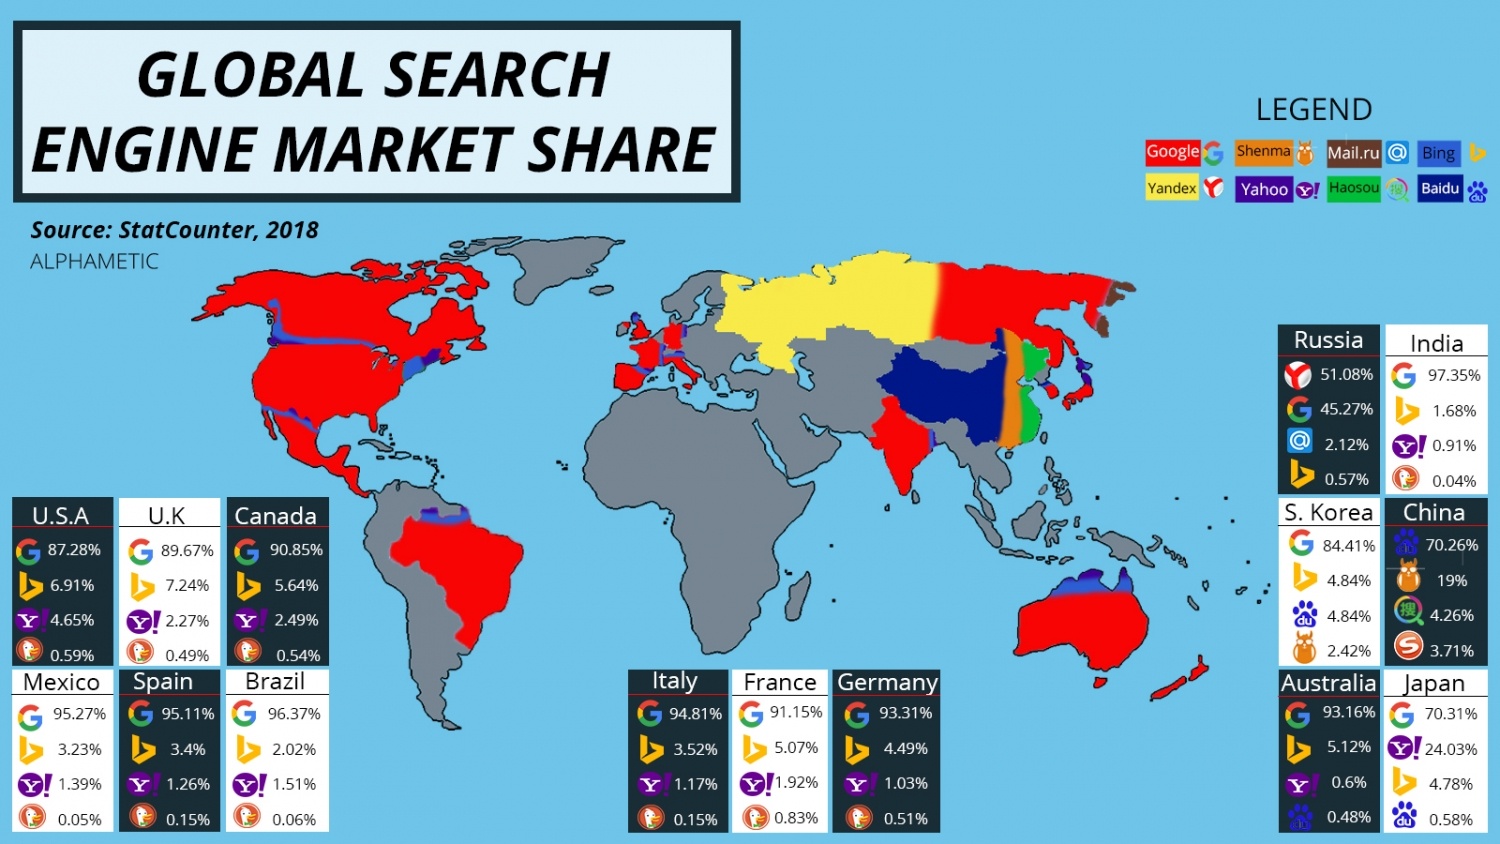 Global Search Engine Market Share in the Top 15 GDP Nations (Updated